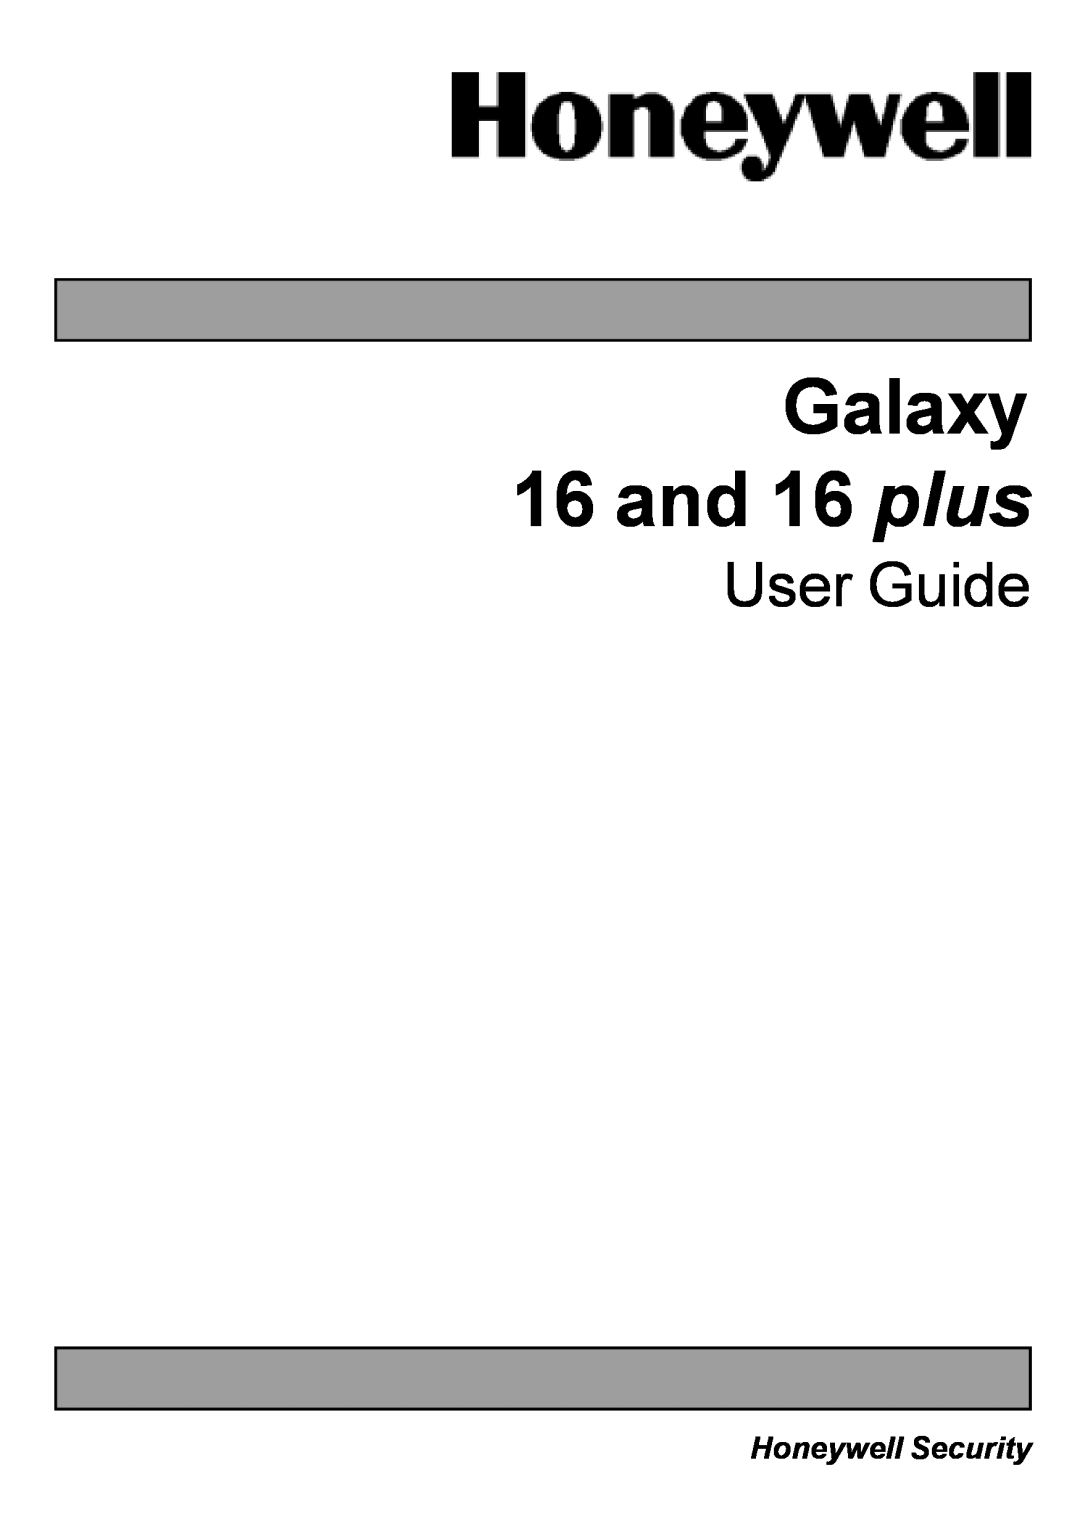 Honeywell 16 Plus manual Galaxy 16 and 16 plus, User Guide, Honeywell Security 